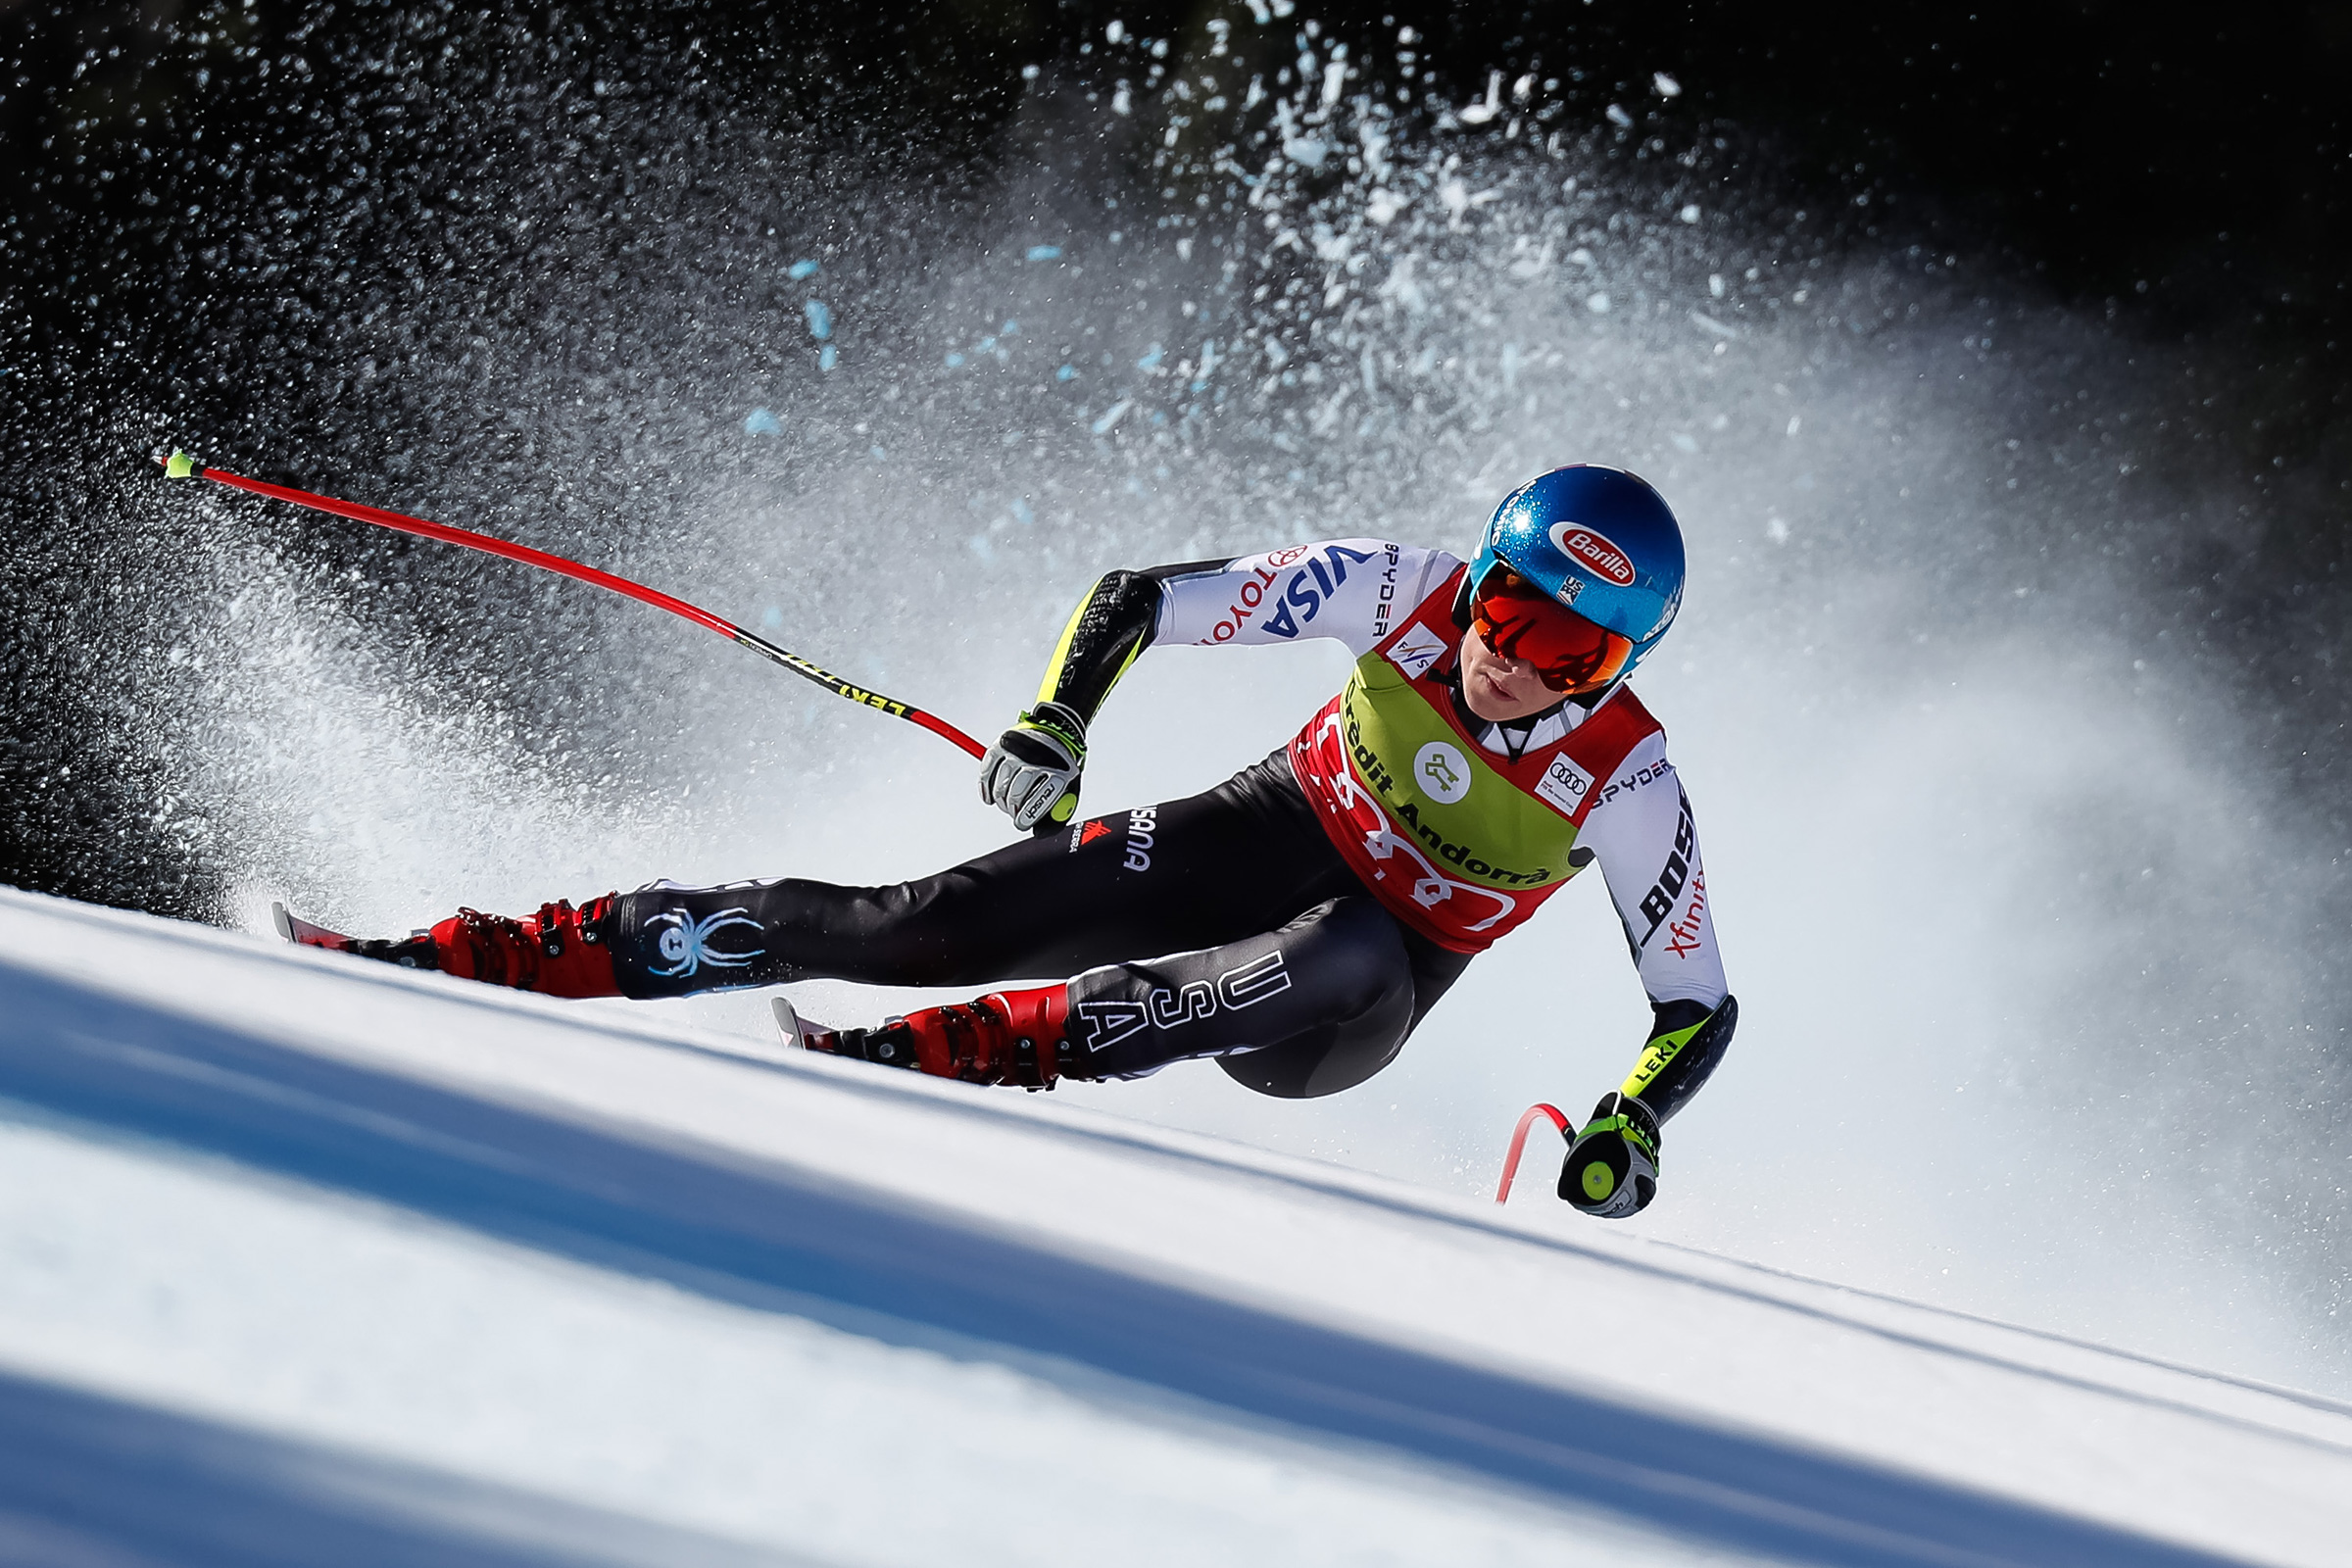 Mikaela Shiffrin of USA competes during the Audi FIS Alpine Ski World Cup Men's and Women's Super G in Soldeu Andorra on March 14, 2019. (Alexis Boichard—Agence Zoom/Getty Images)